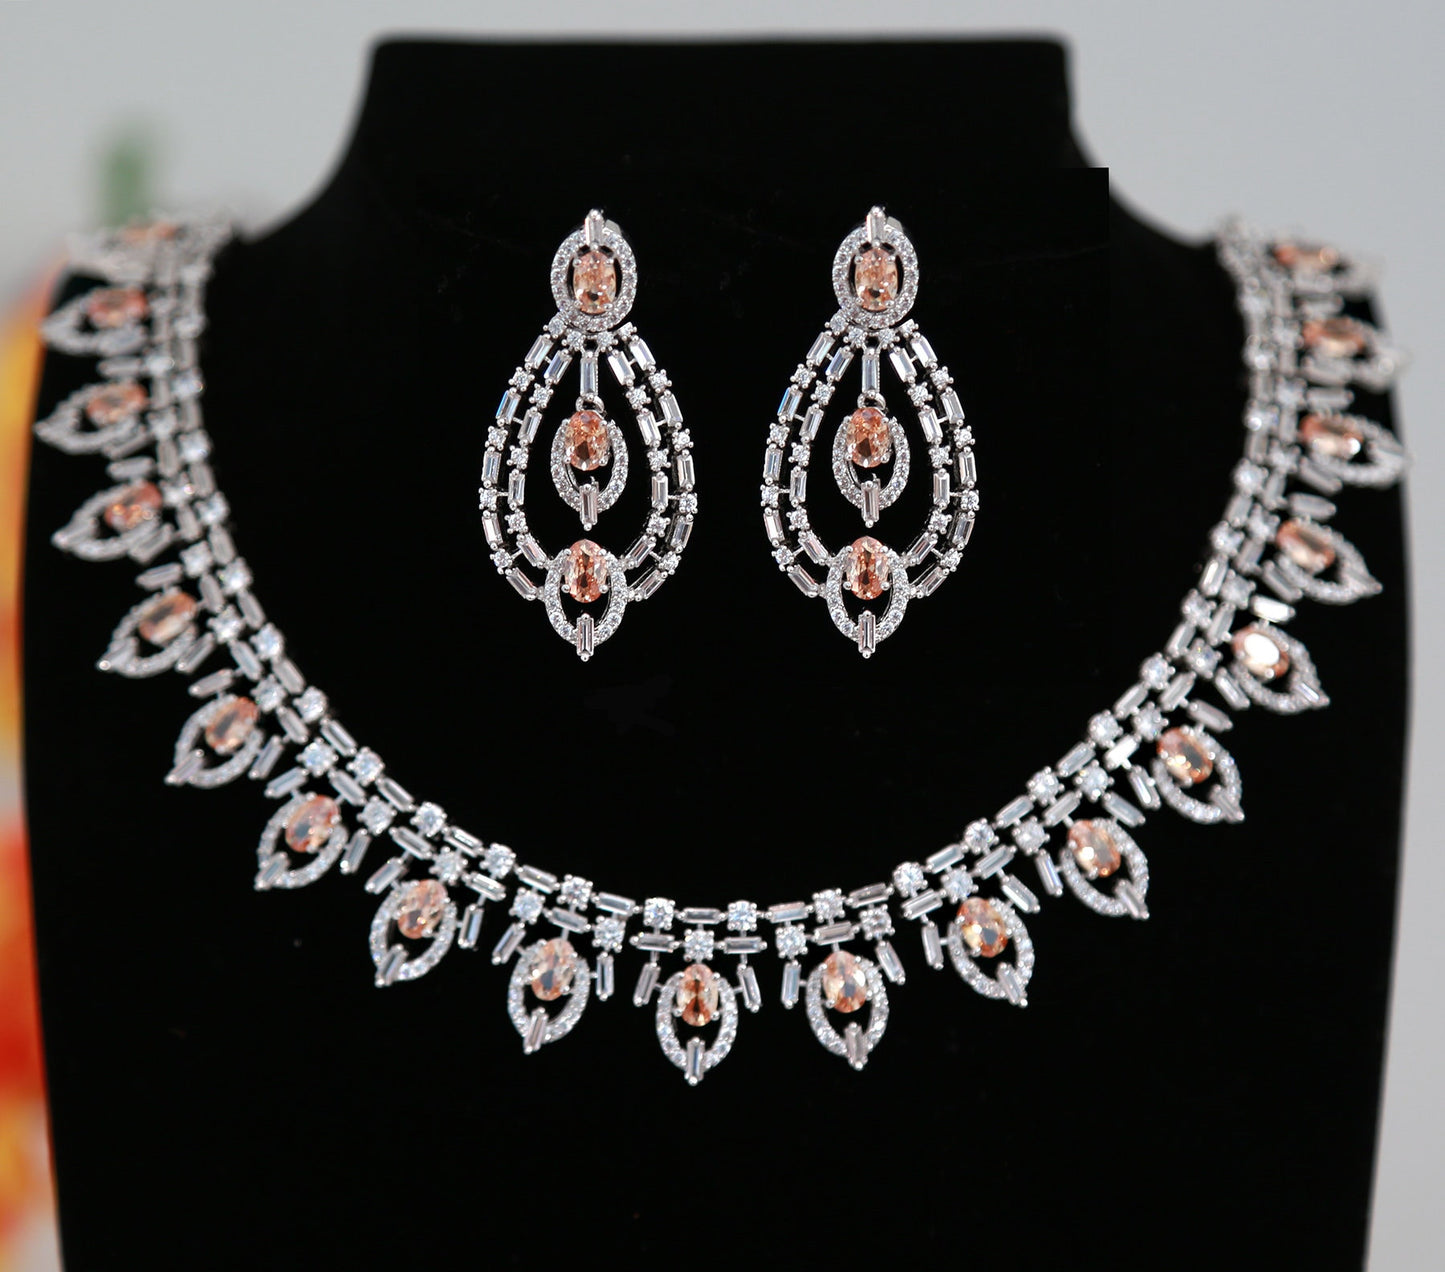 Silver Plated Emerald Crystal necklace | American diamond bridal necklace set |Bollywood Indian Pakistani AD necklace design |wedding set